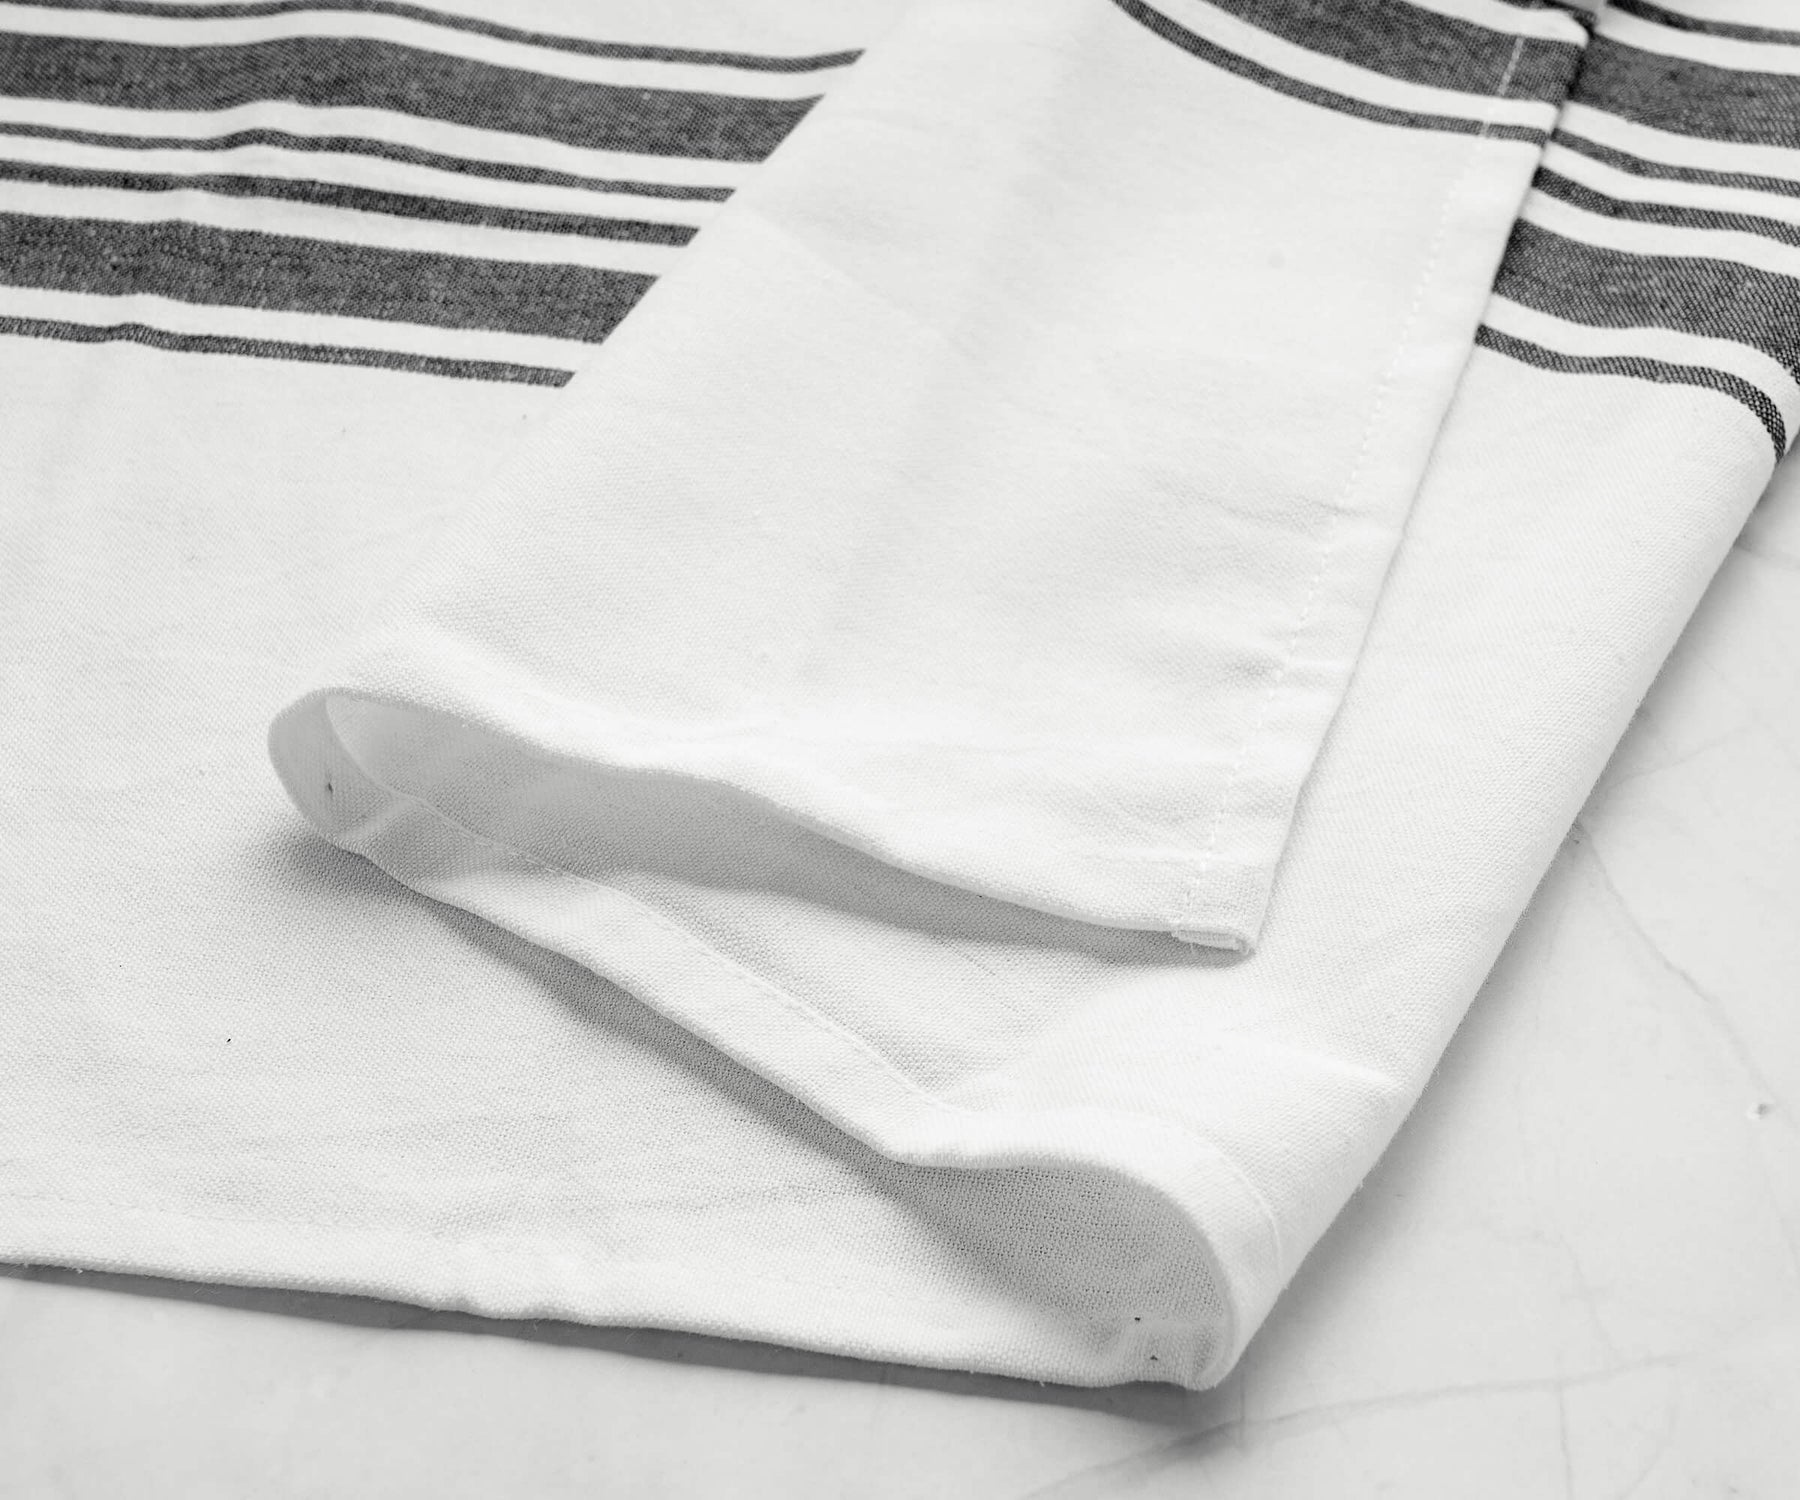 Single kitchen towel featuring black and white stripes on a marble countertop